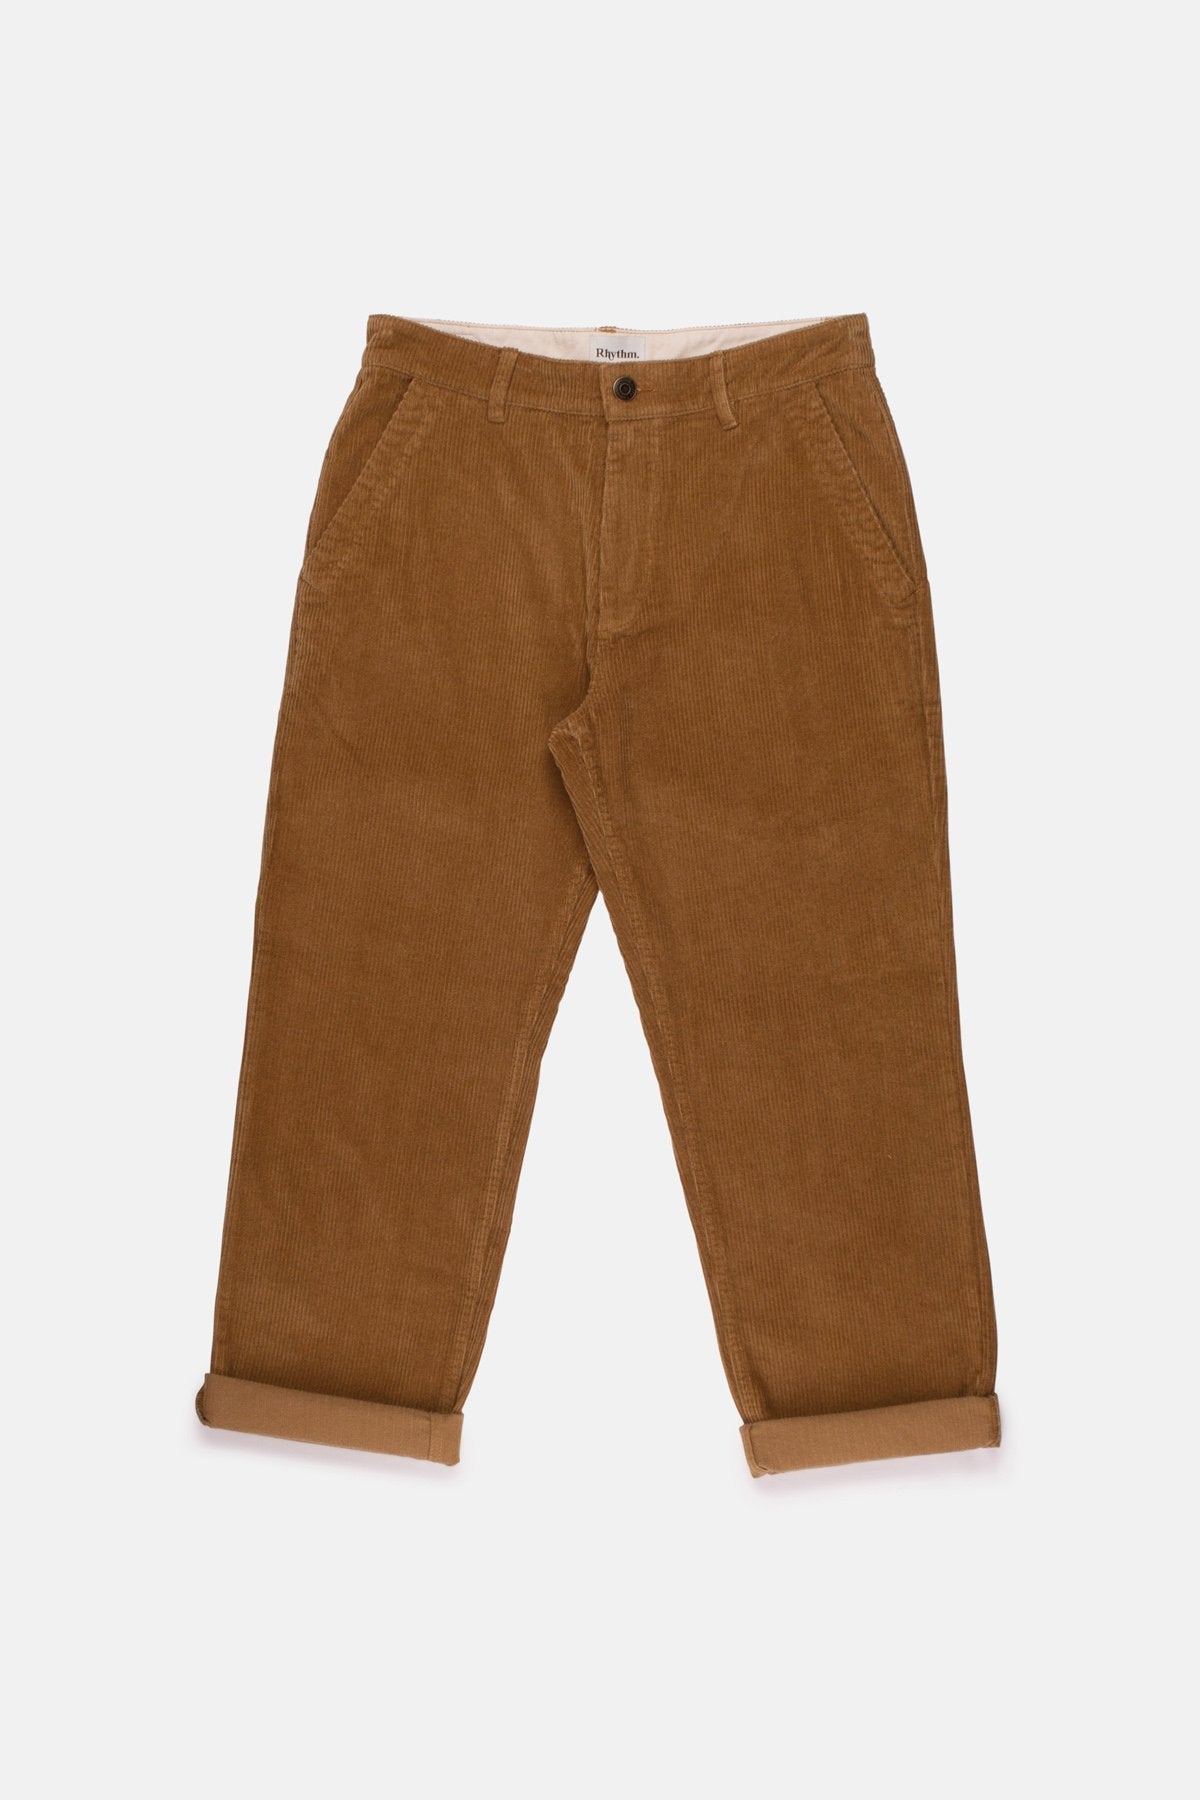 The Cord Fatigue Pant